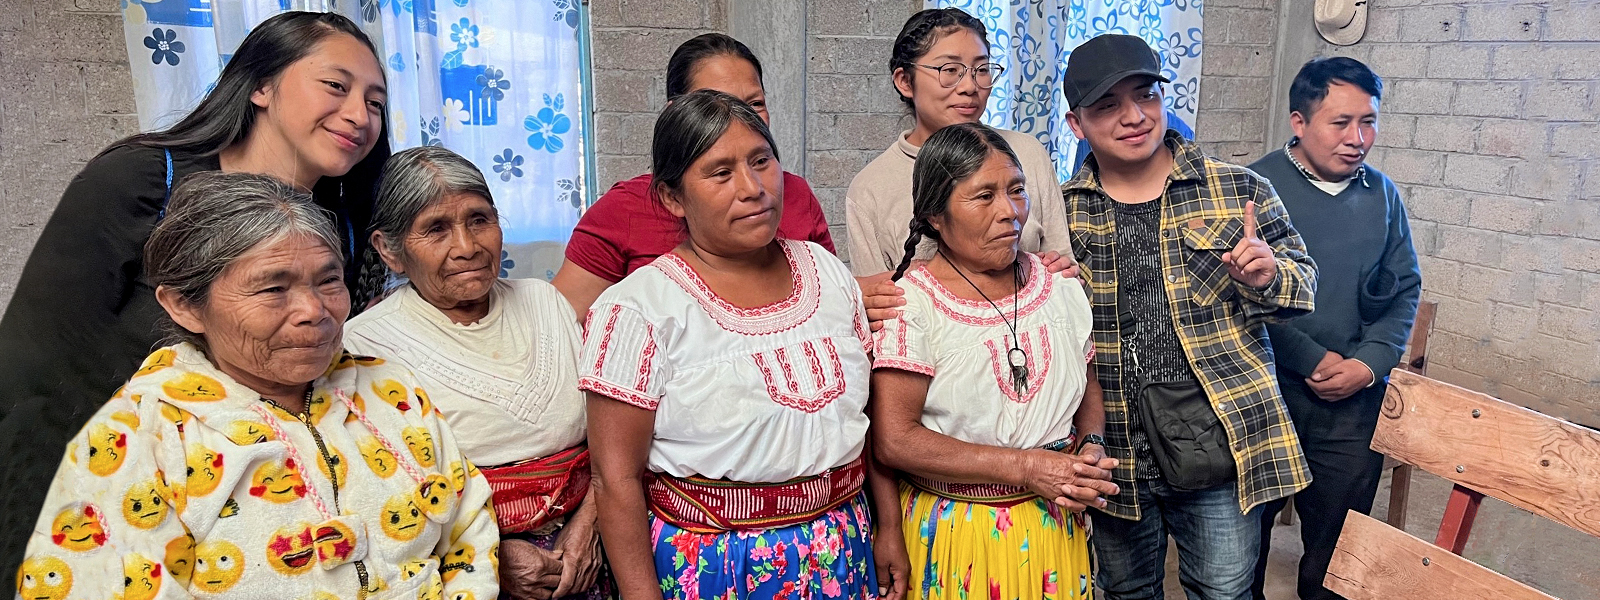 Christians in Mexico gather for a picture in their church building made from gray bricks